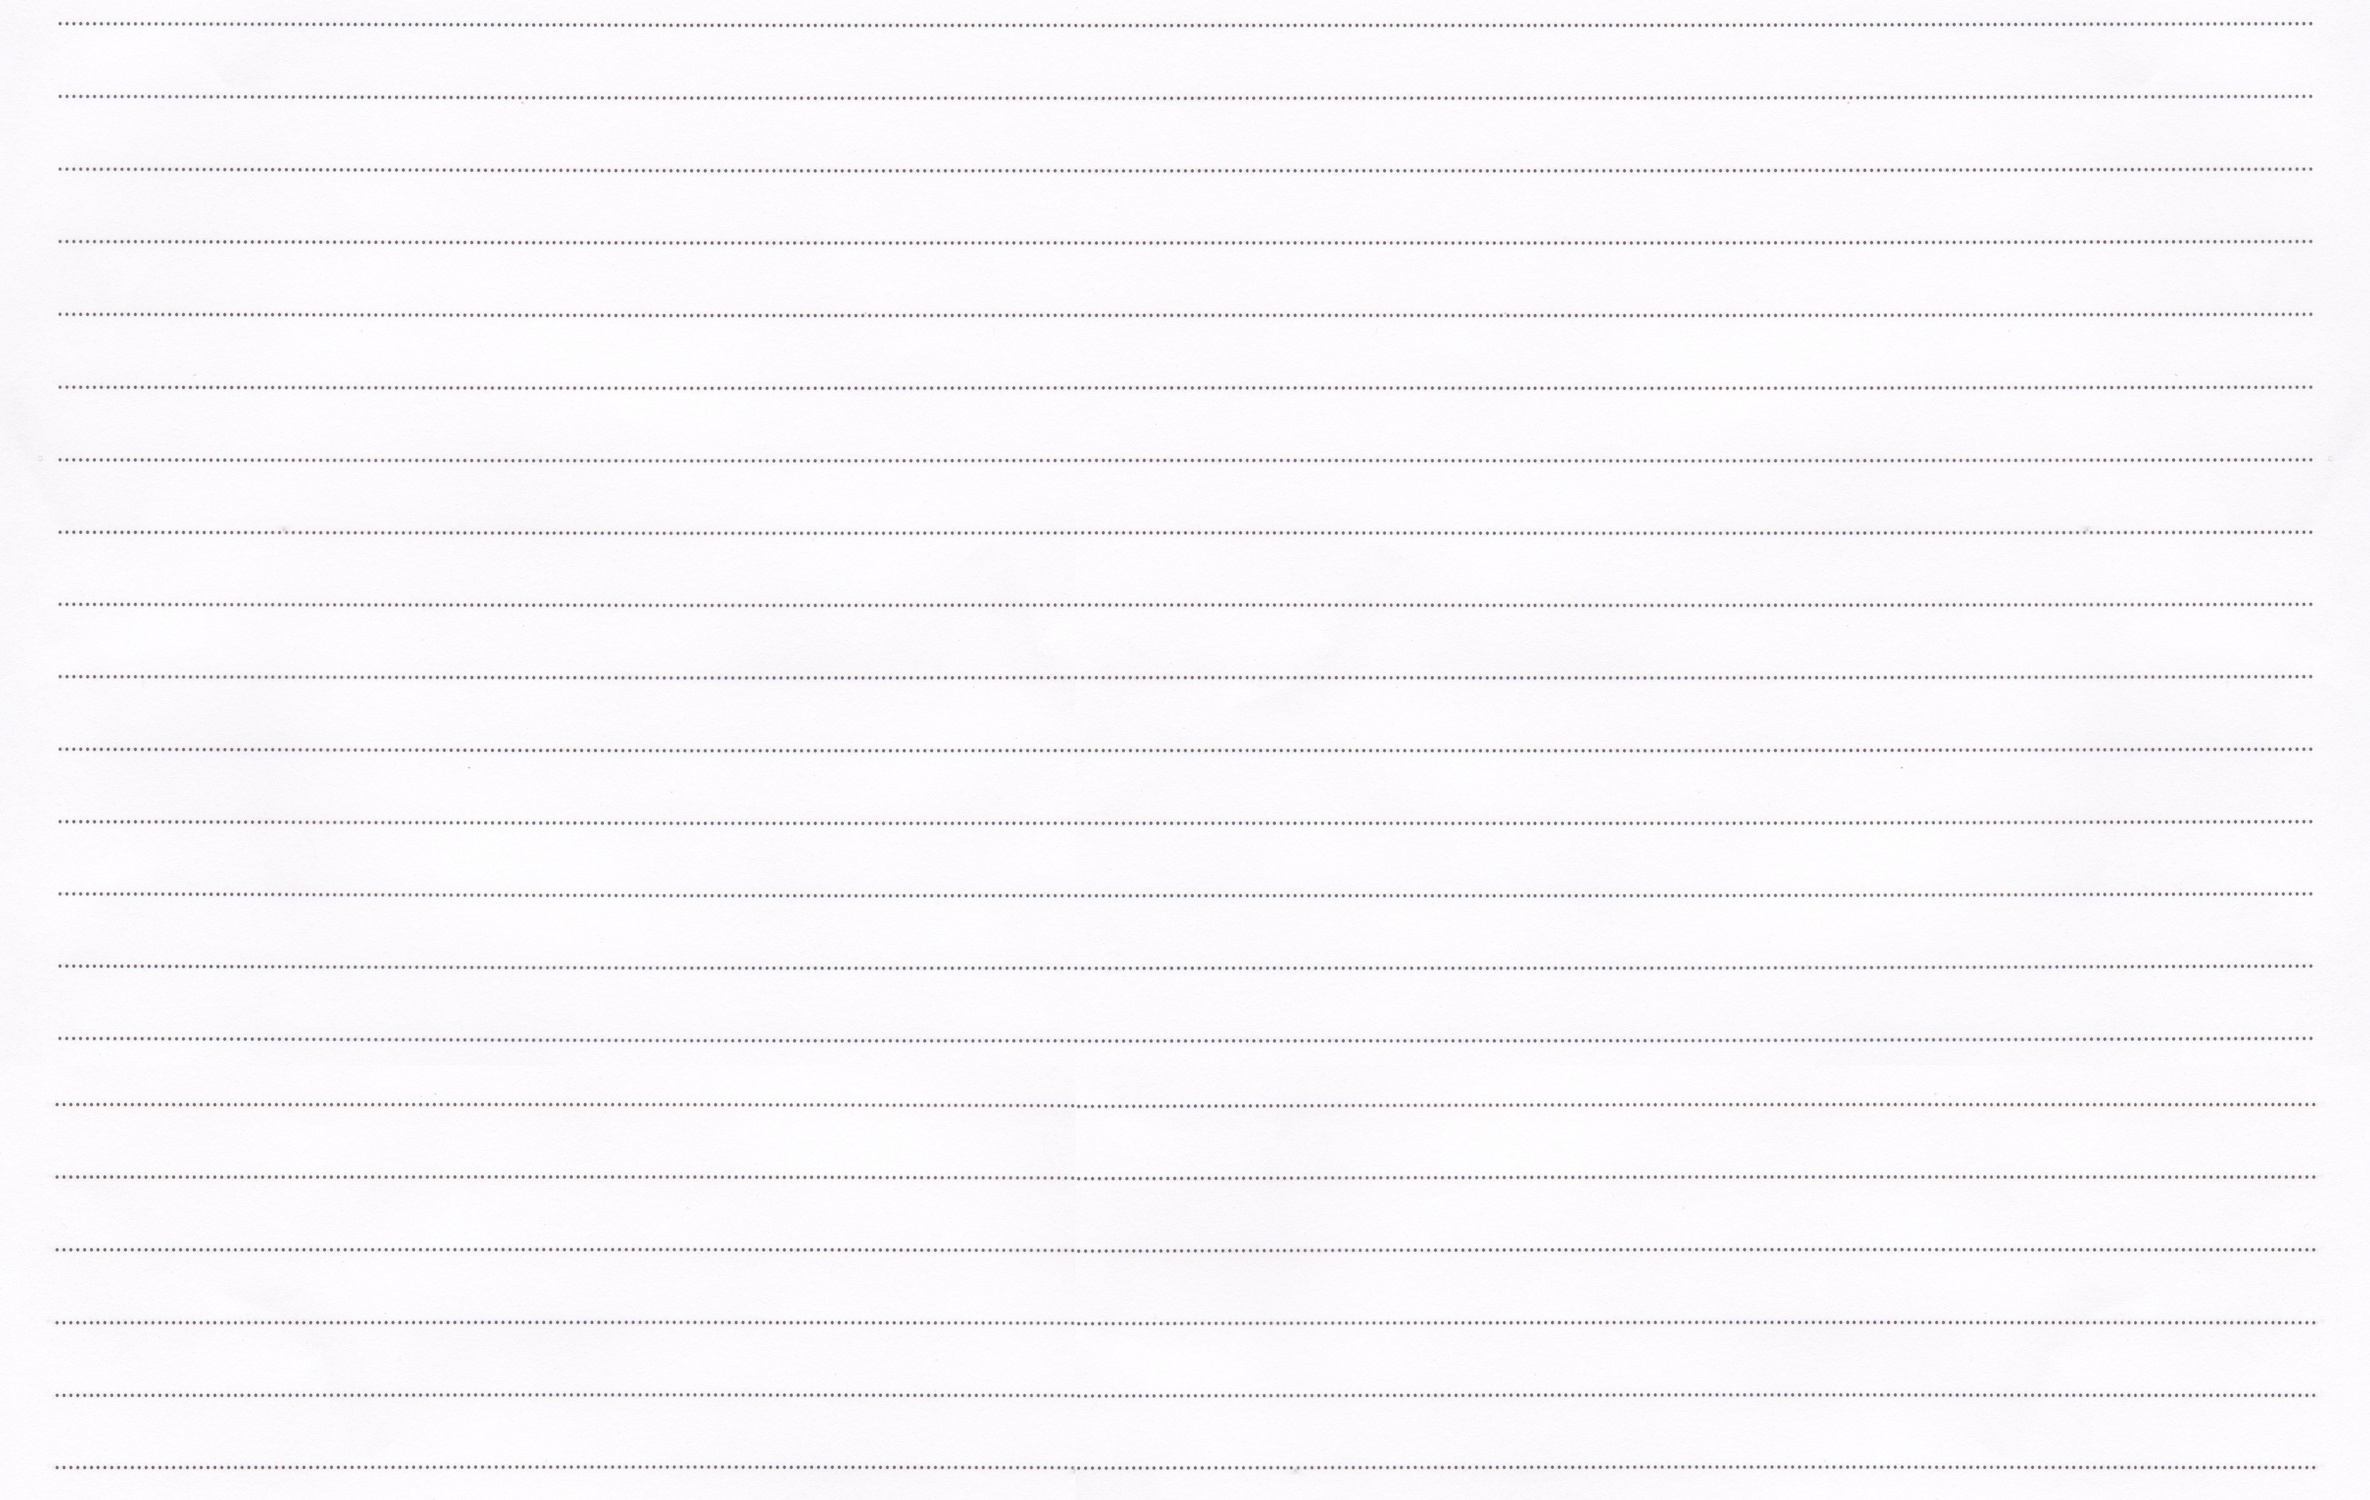 Blank lined paper background.